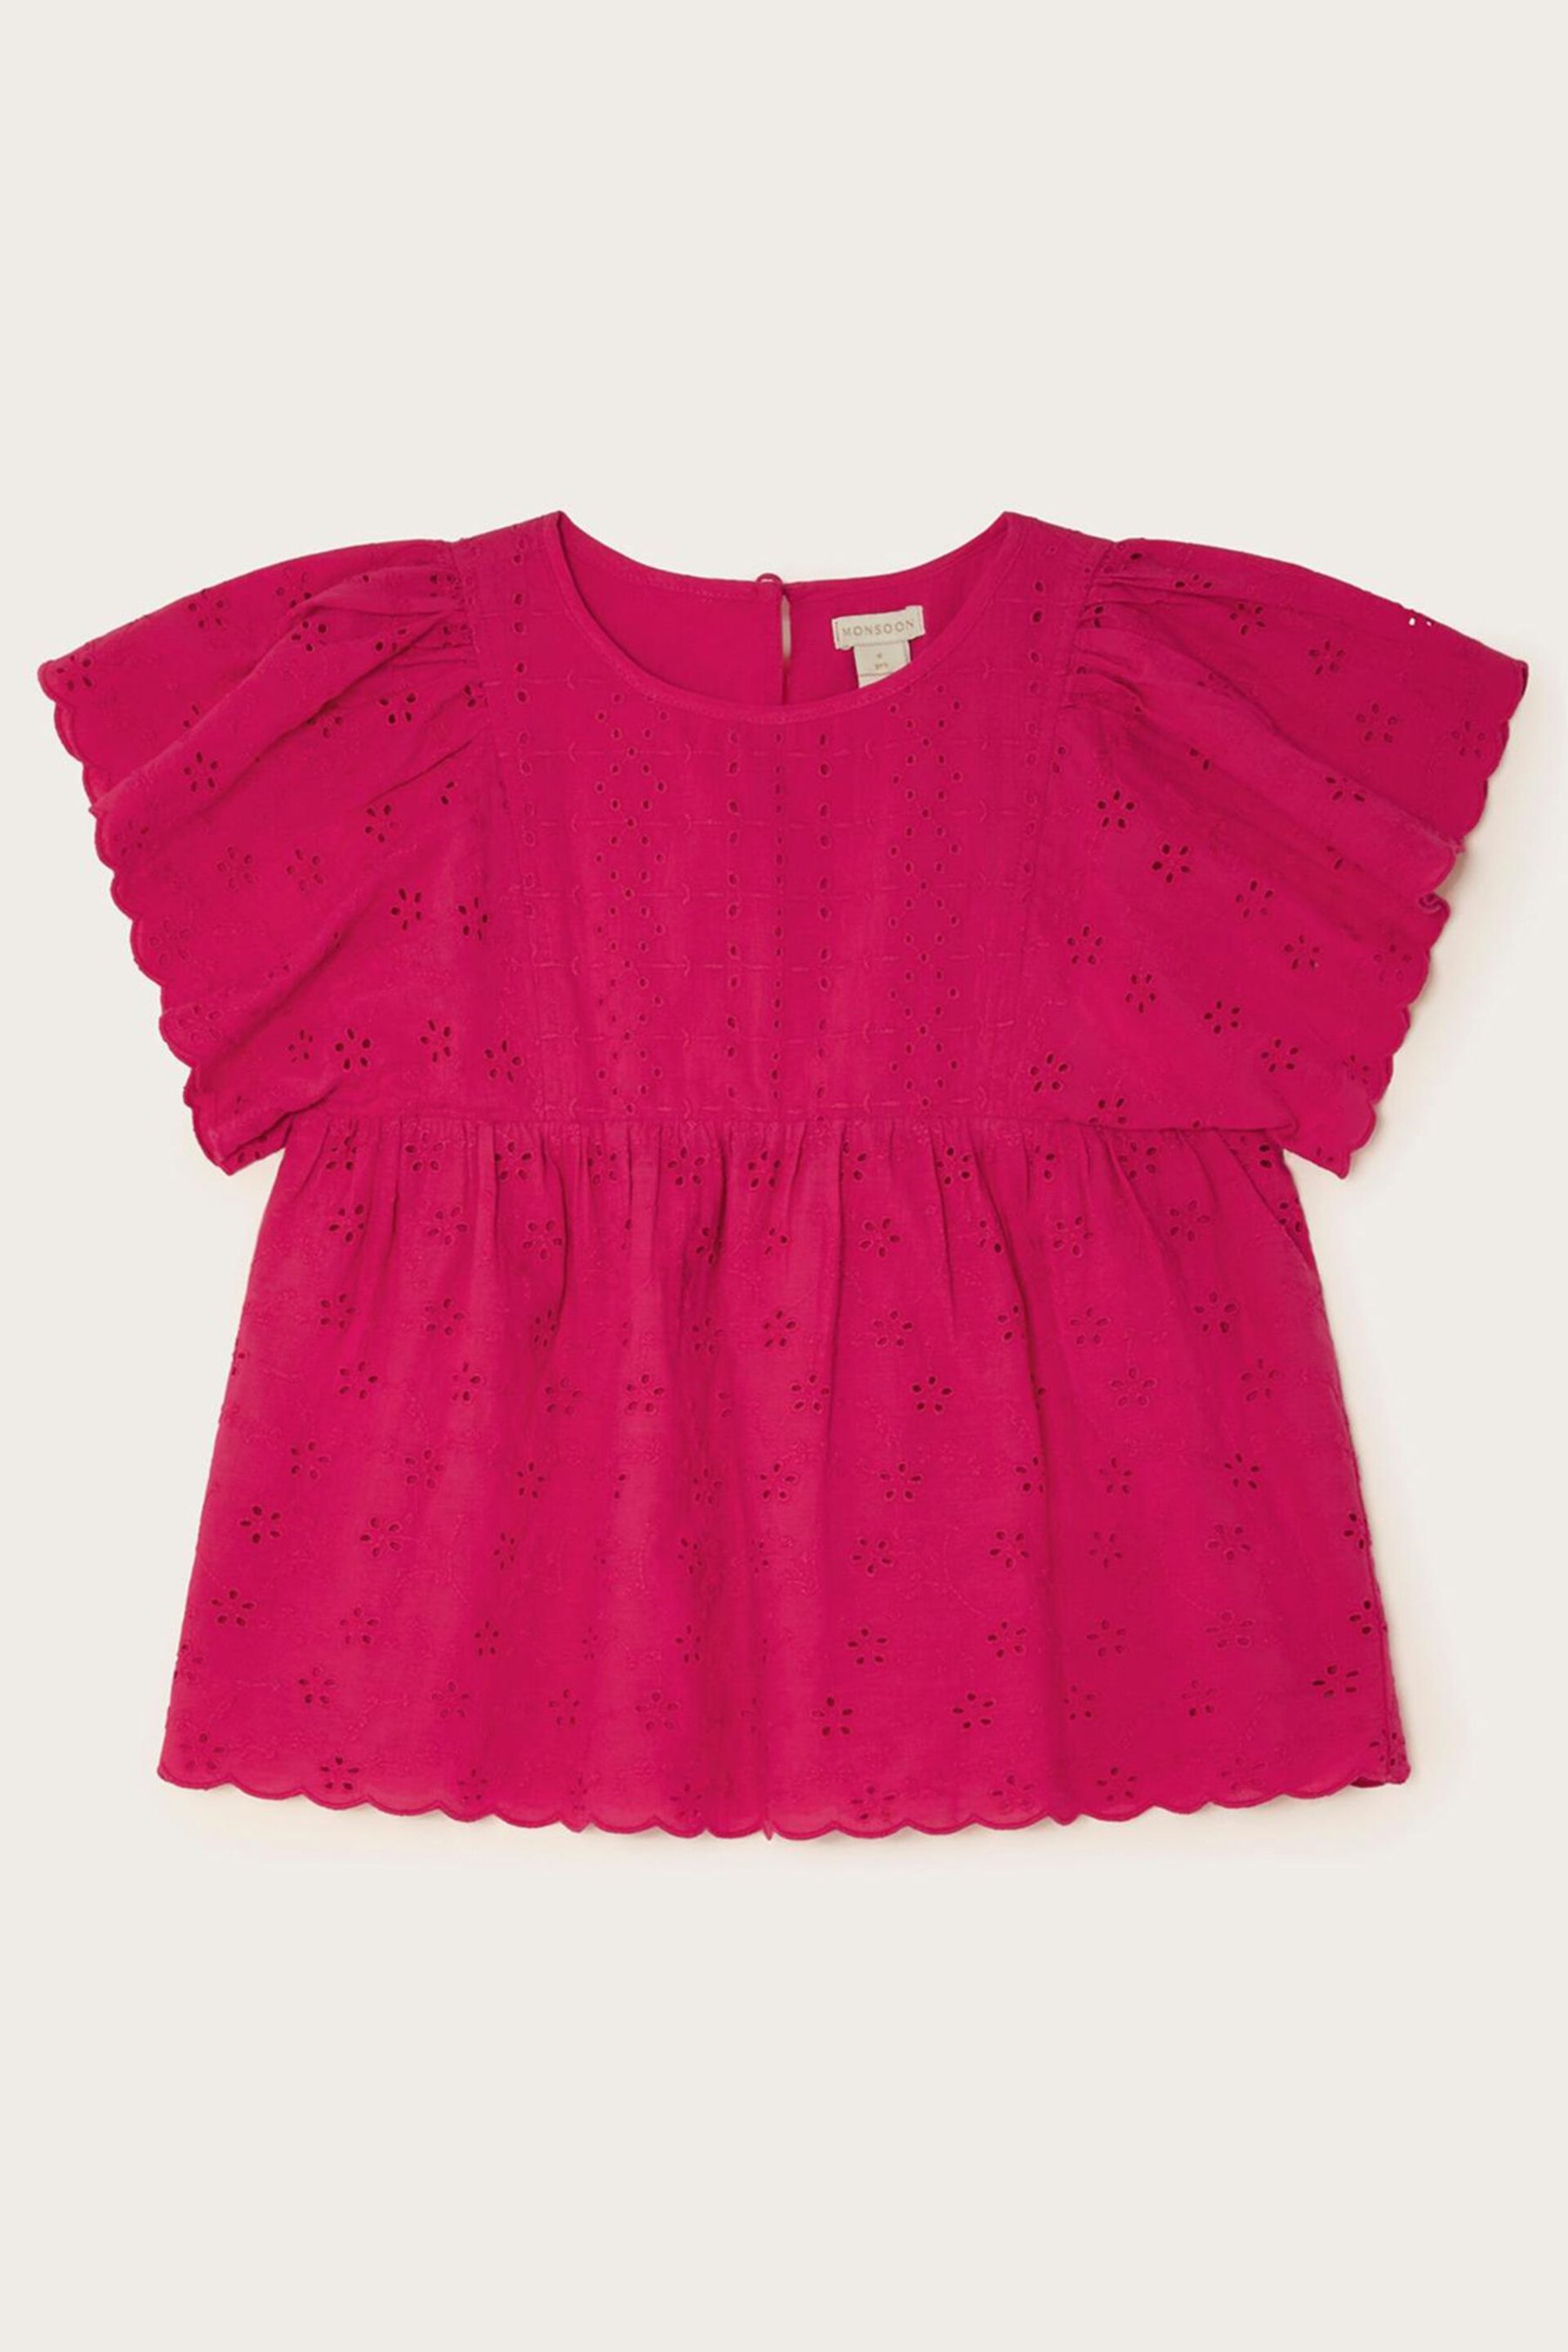 Monsoon Pink Broderie Blouse - Image 1 of 3